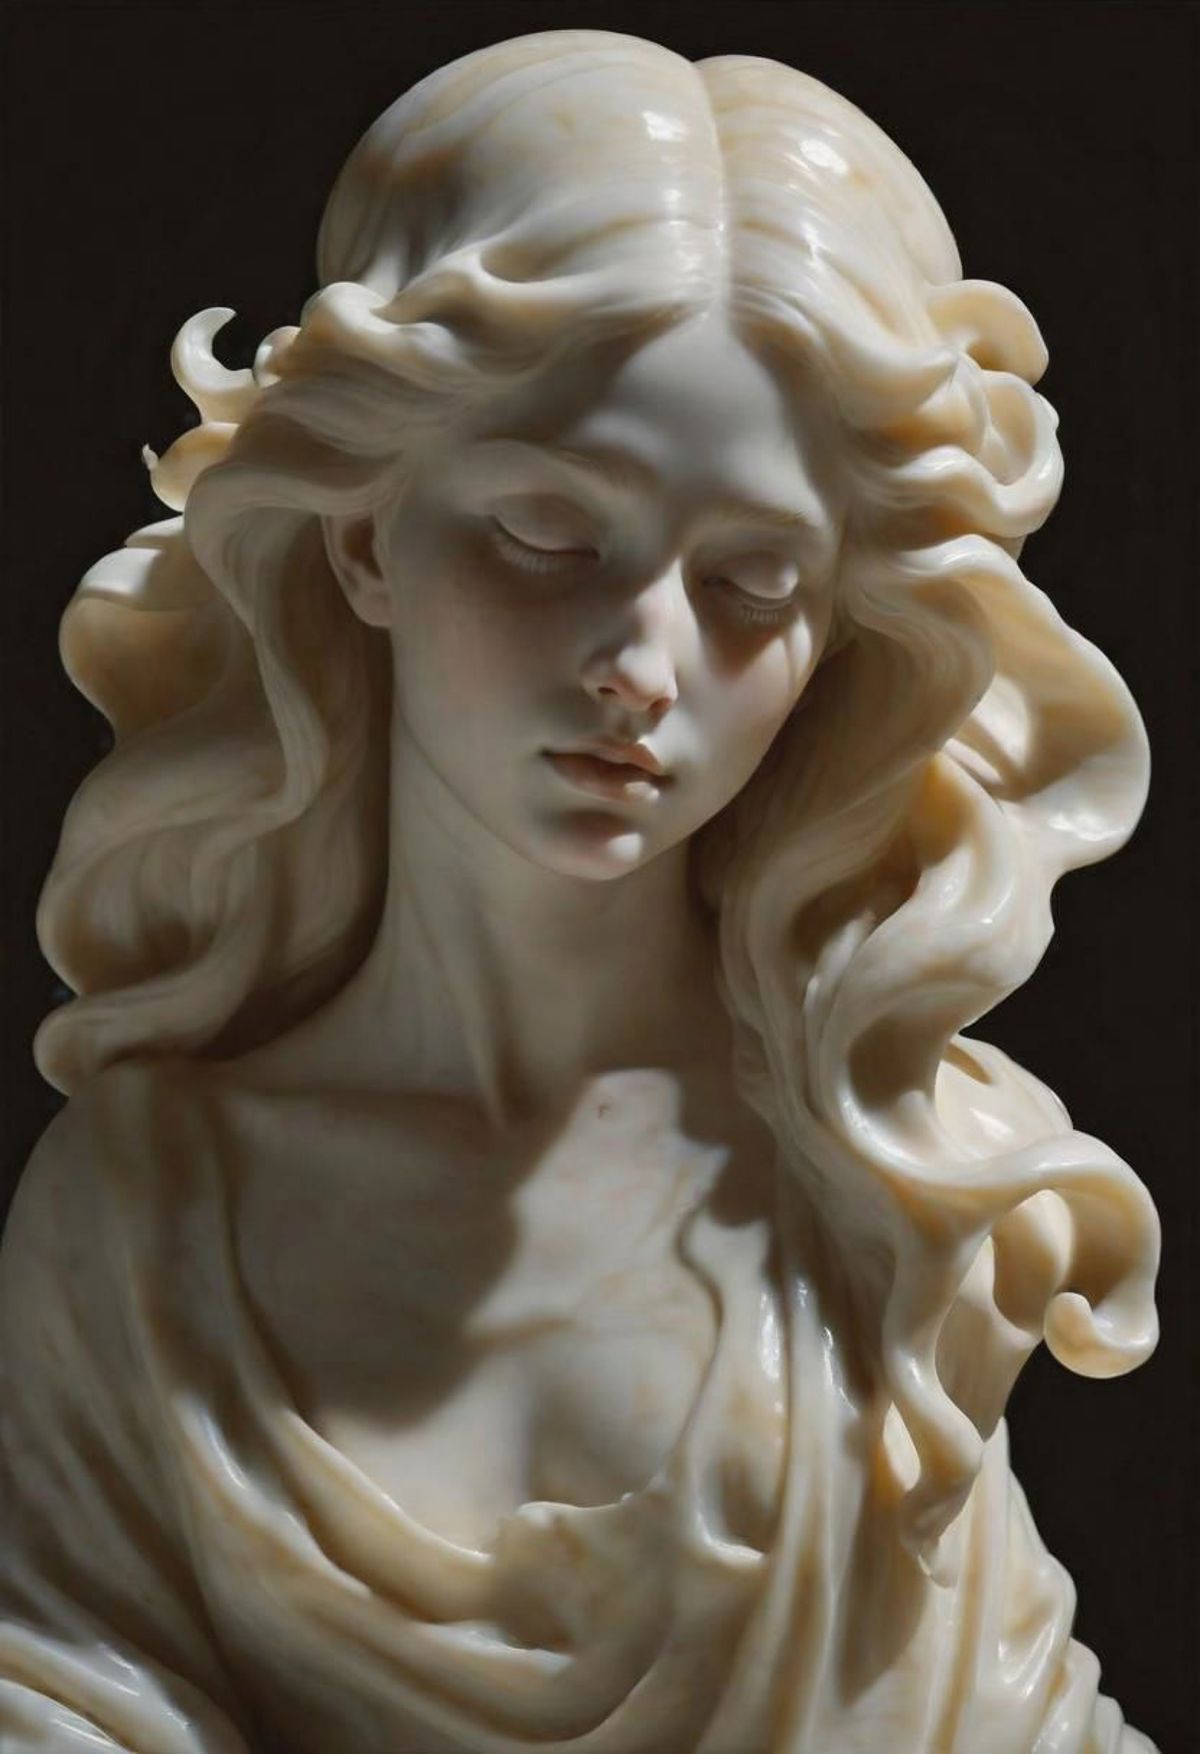 A white marble statue of a woman with her eyes closed.